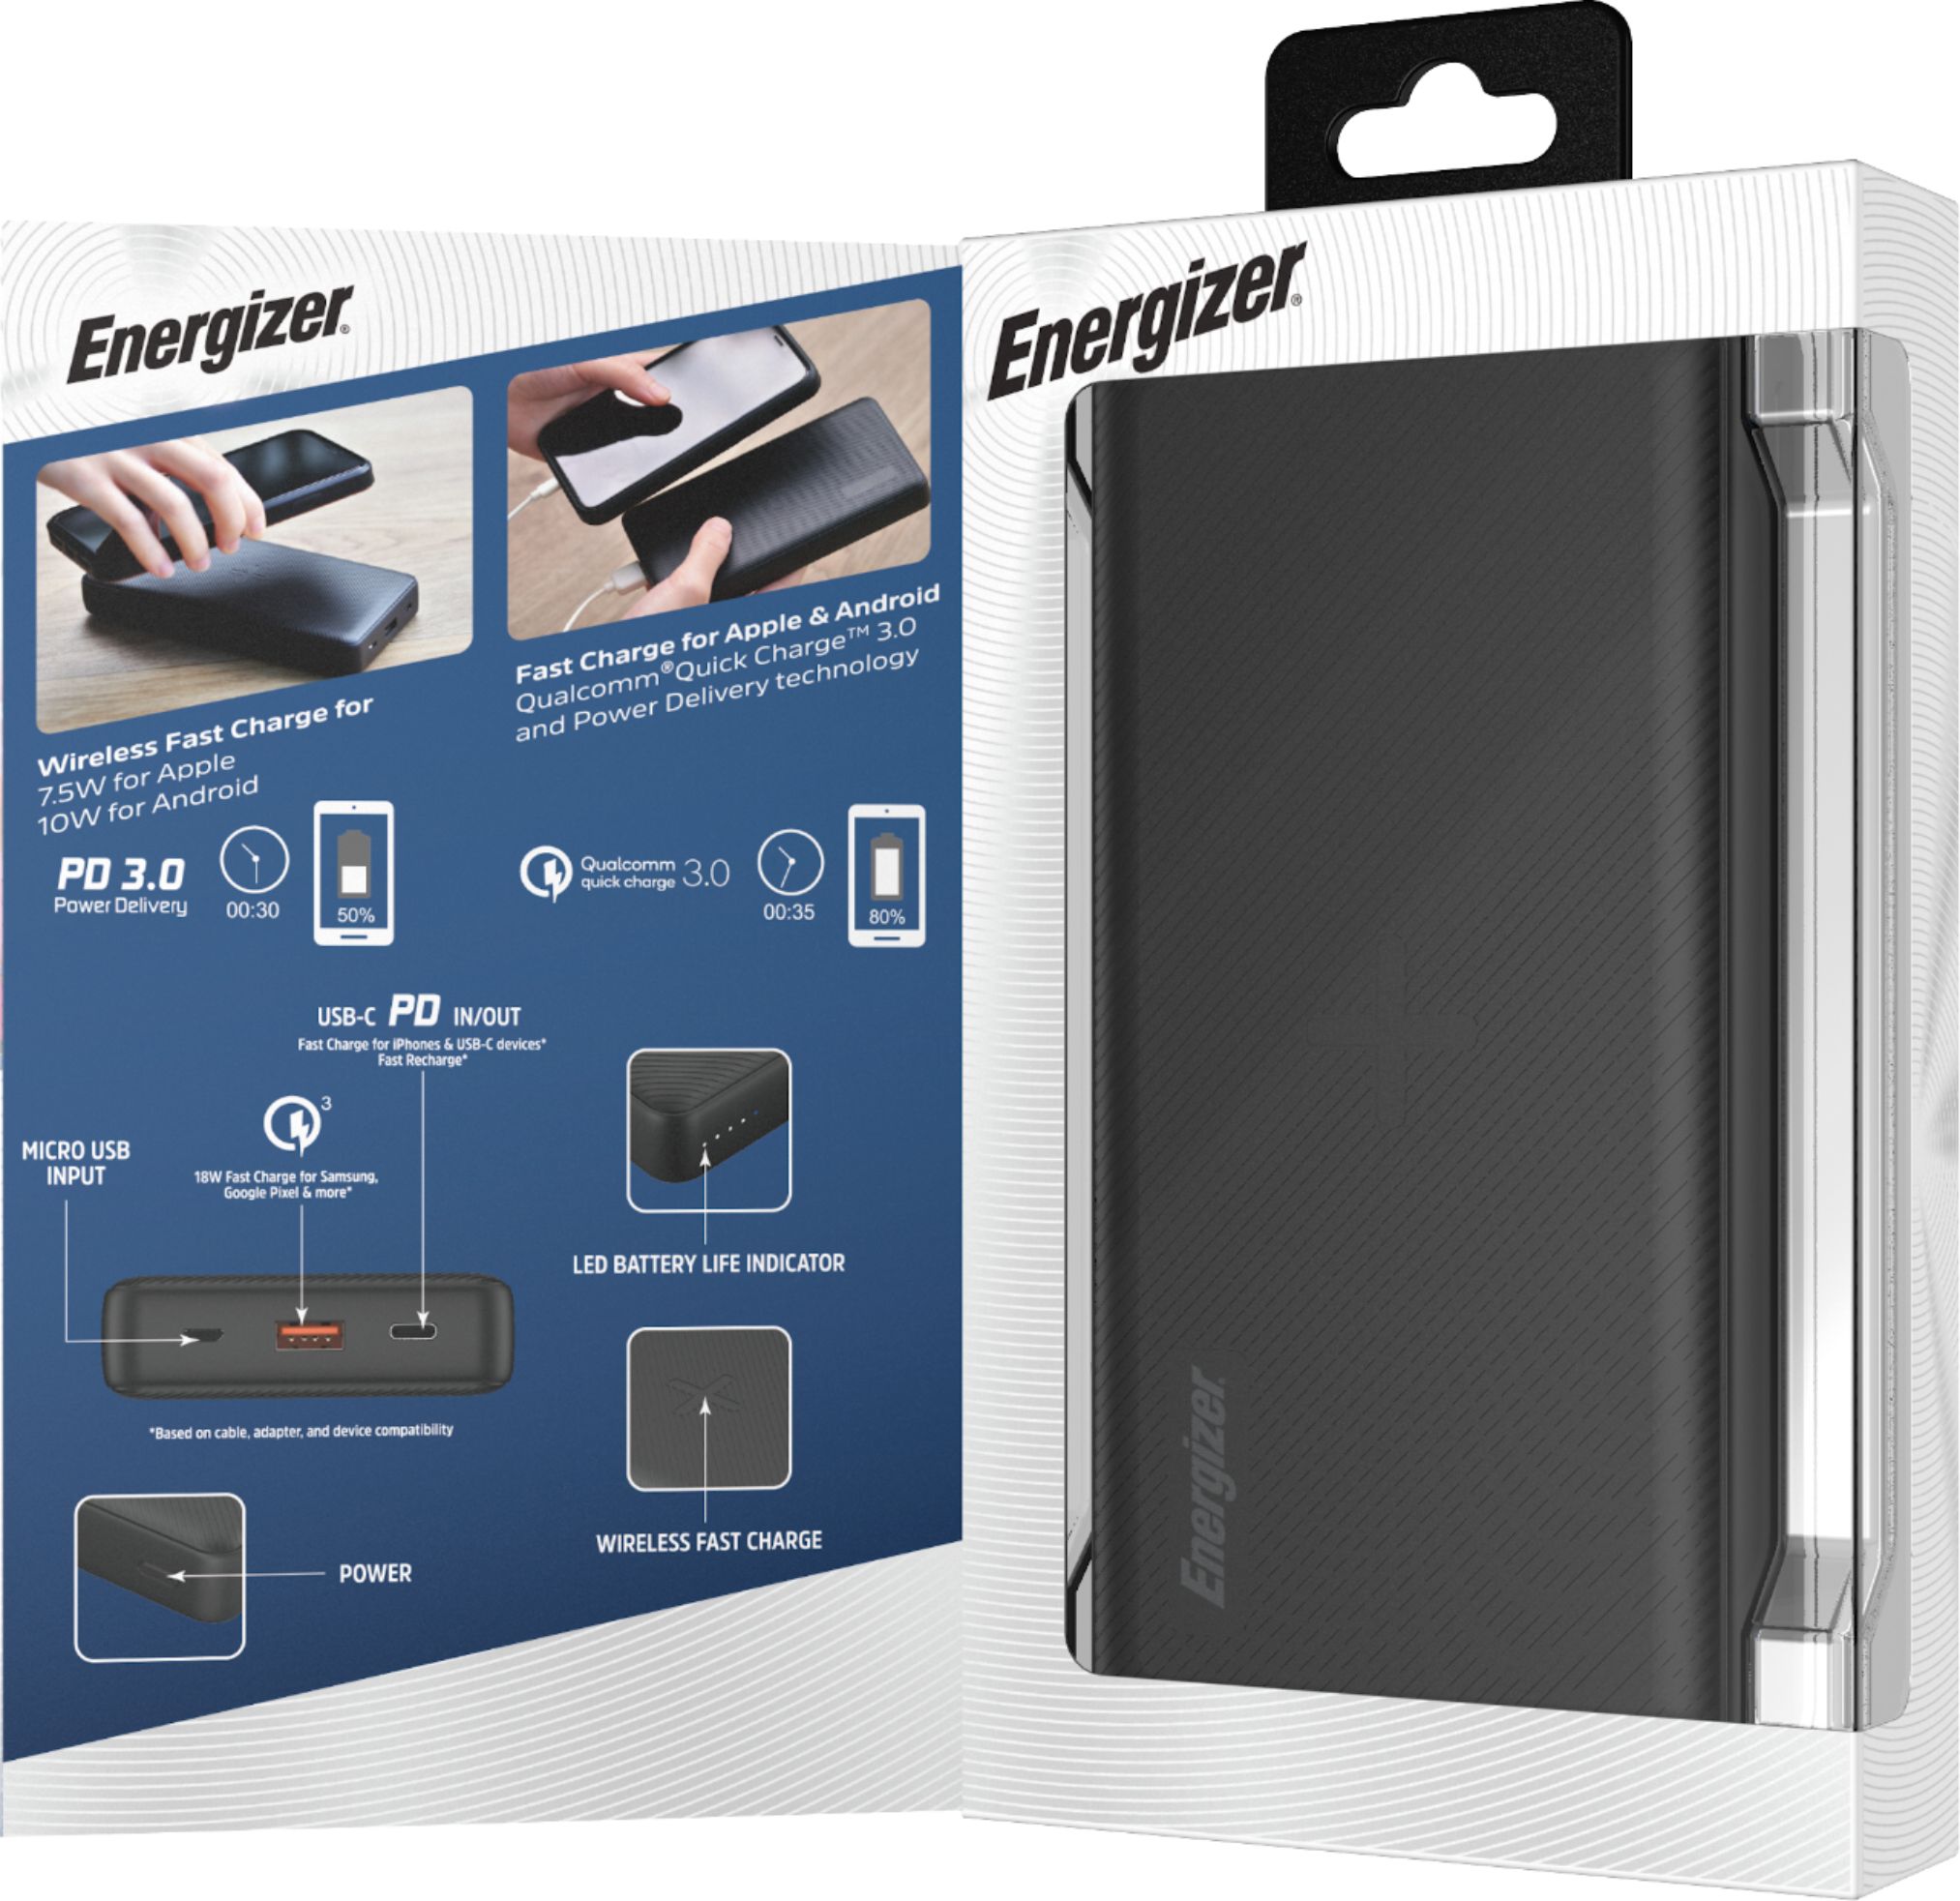 Best Buy: Energizer Ultimate Lithium 20,000mAh 18W Fast Charge